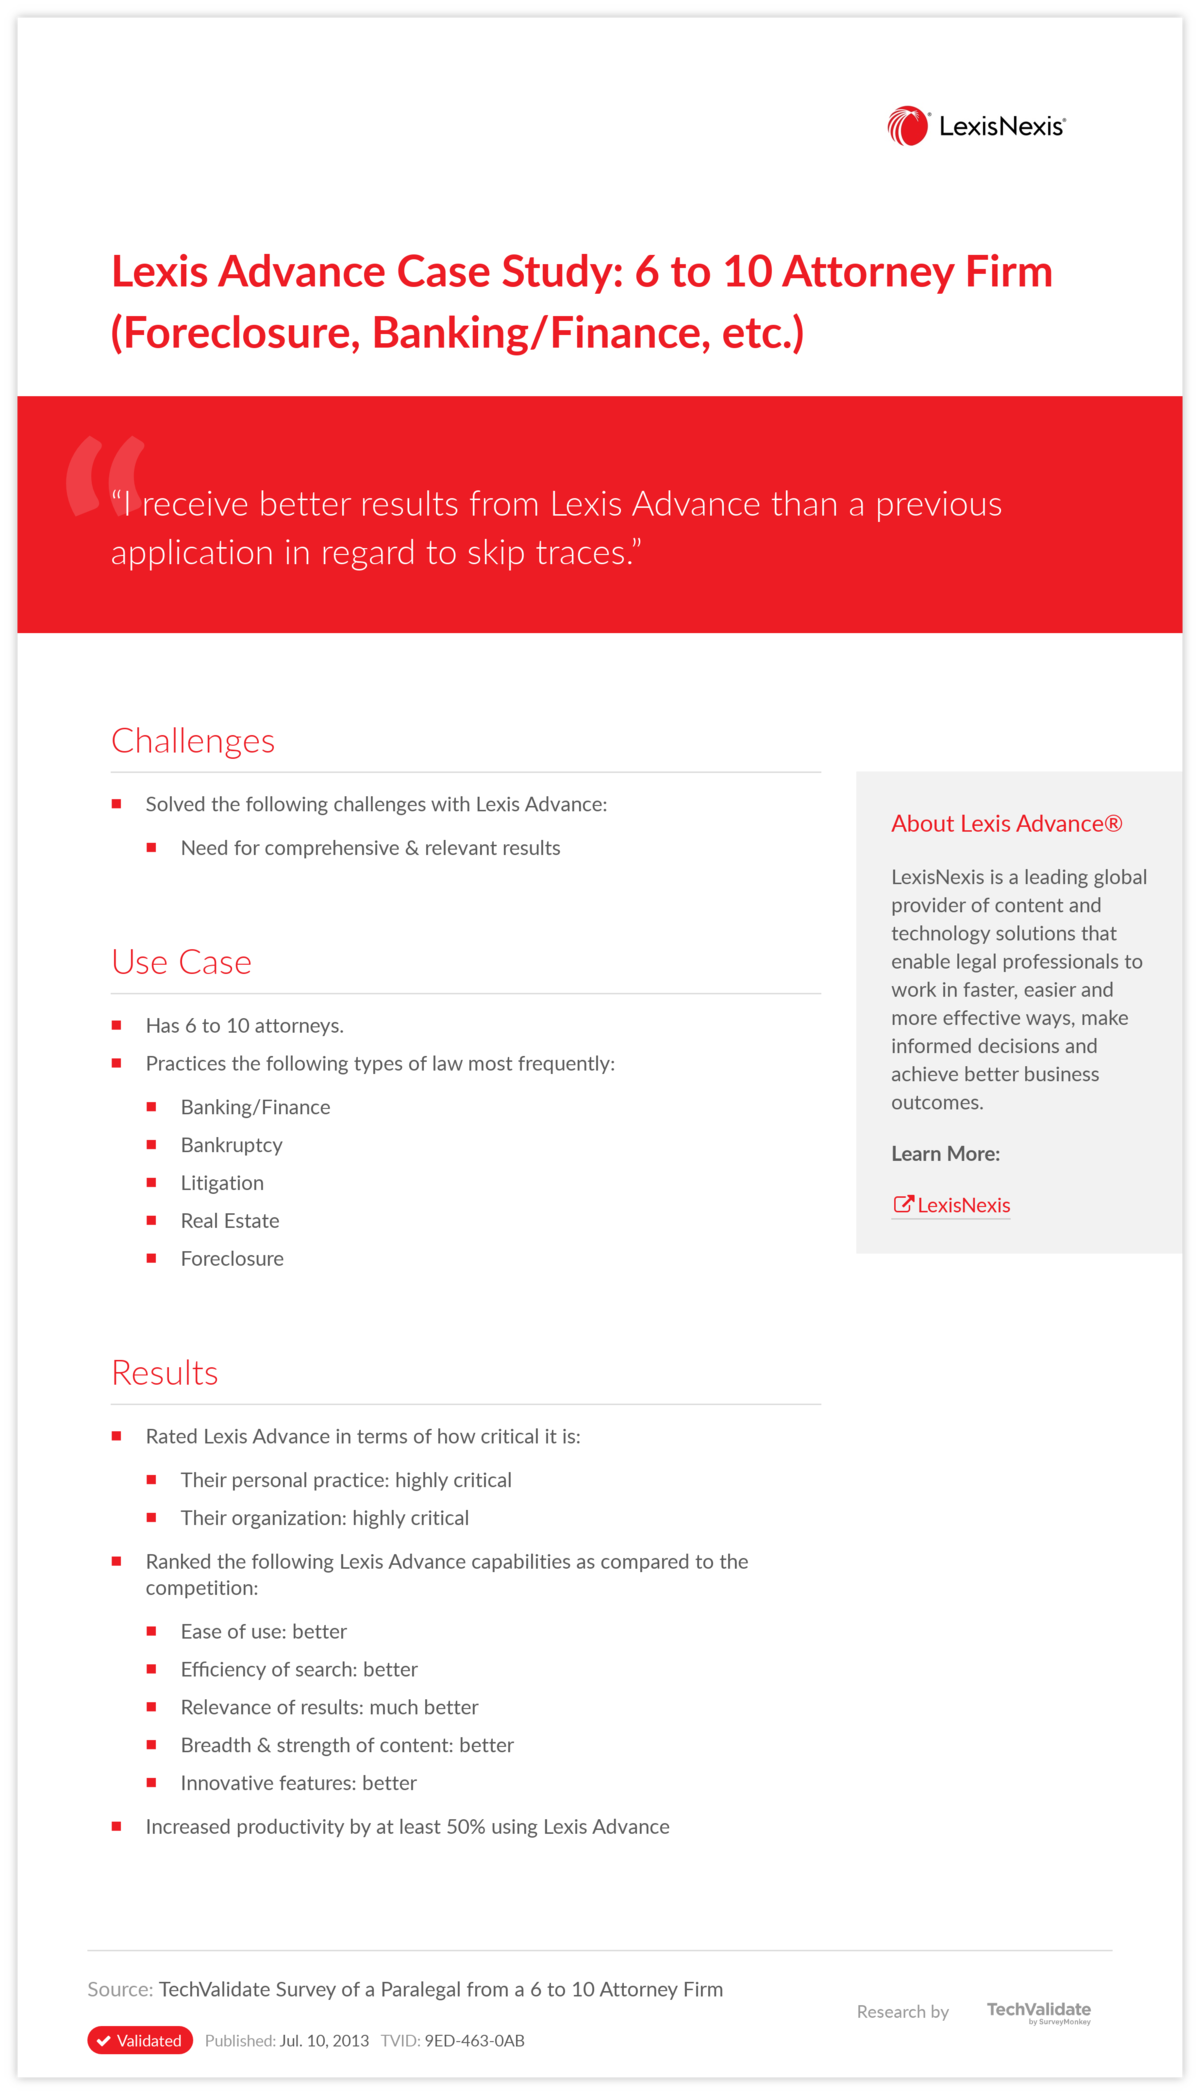 Lexis Advance Case Study: 6 to 10 Attorney Firm (Foreclosure, Banking/Finance, etc.)